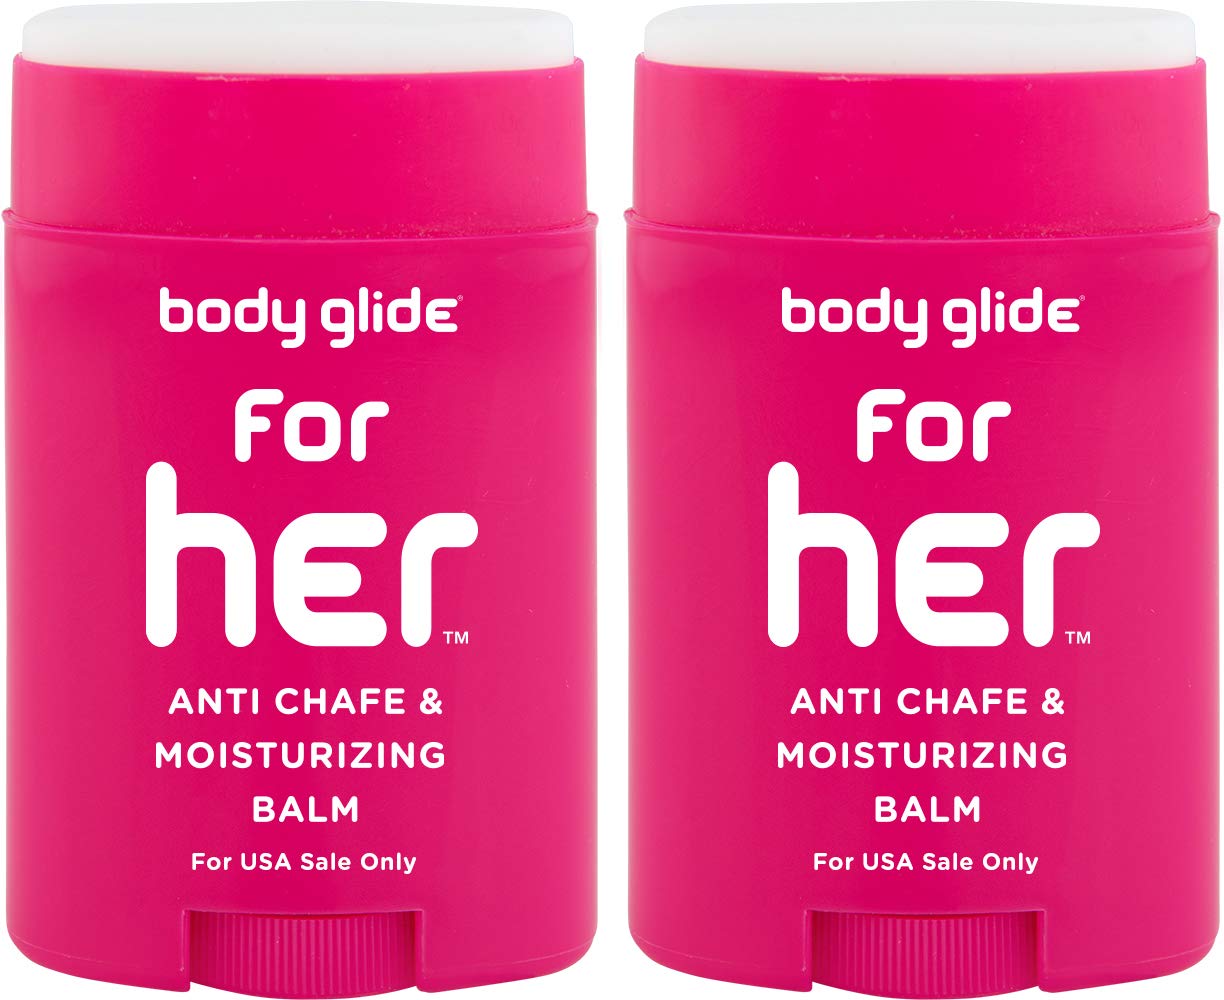 Body Glide For Her Anti Chafe Balm: anti chafing stick with added emollients. Prevent rubbing leading to chafing, raw skin, and irritation. Use for arm, chest, bra, butt, groin, and thigh chafing: 1.5oz-2pack